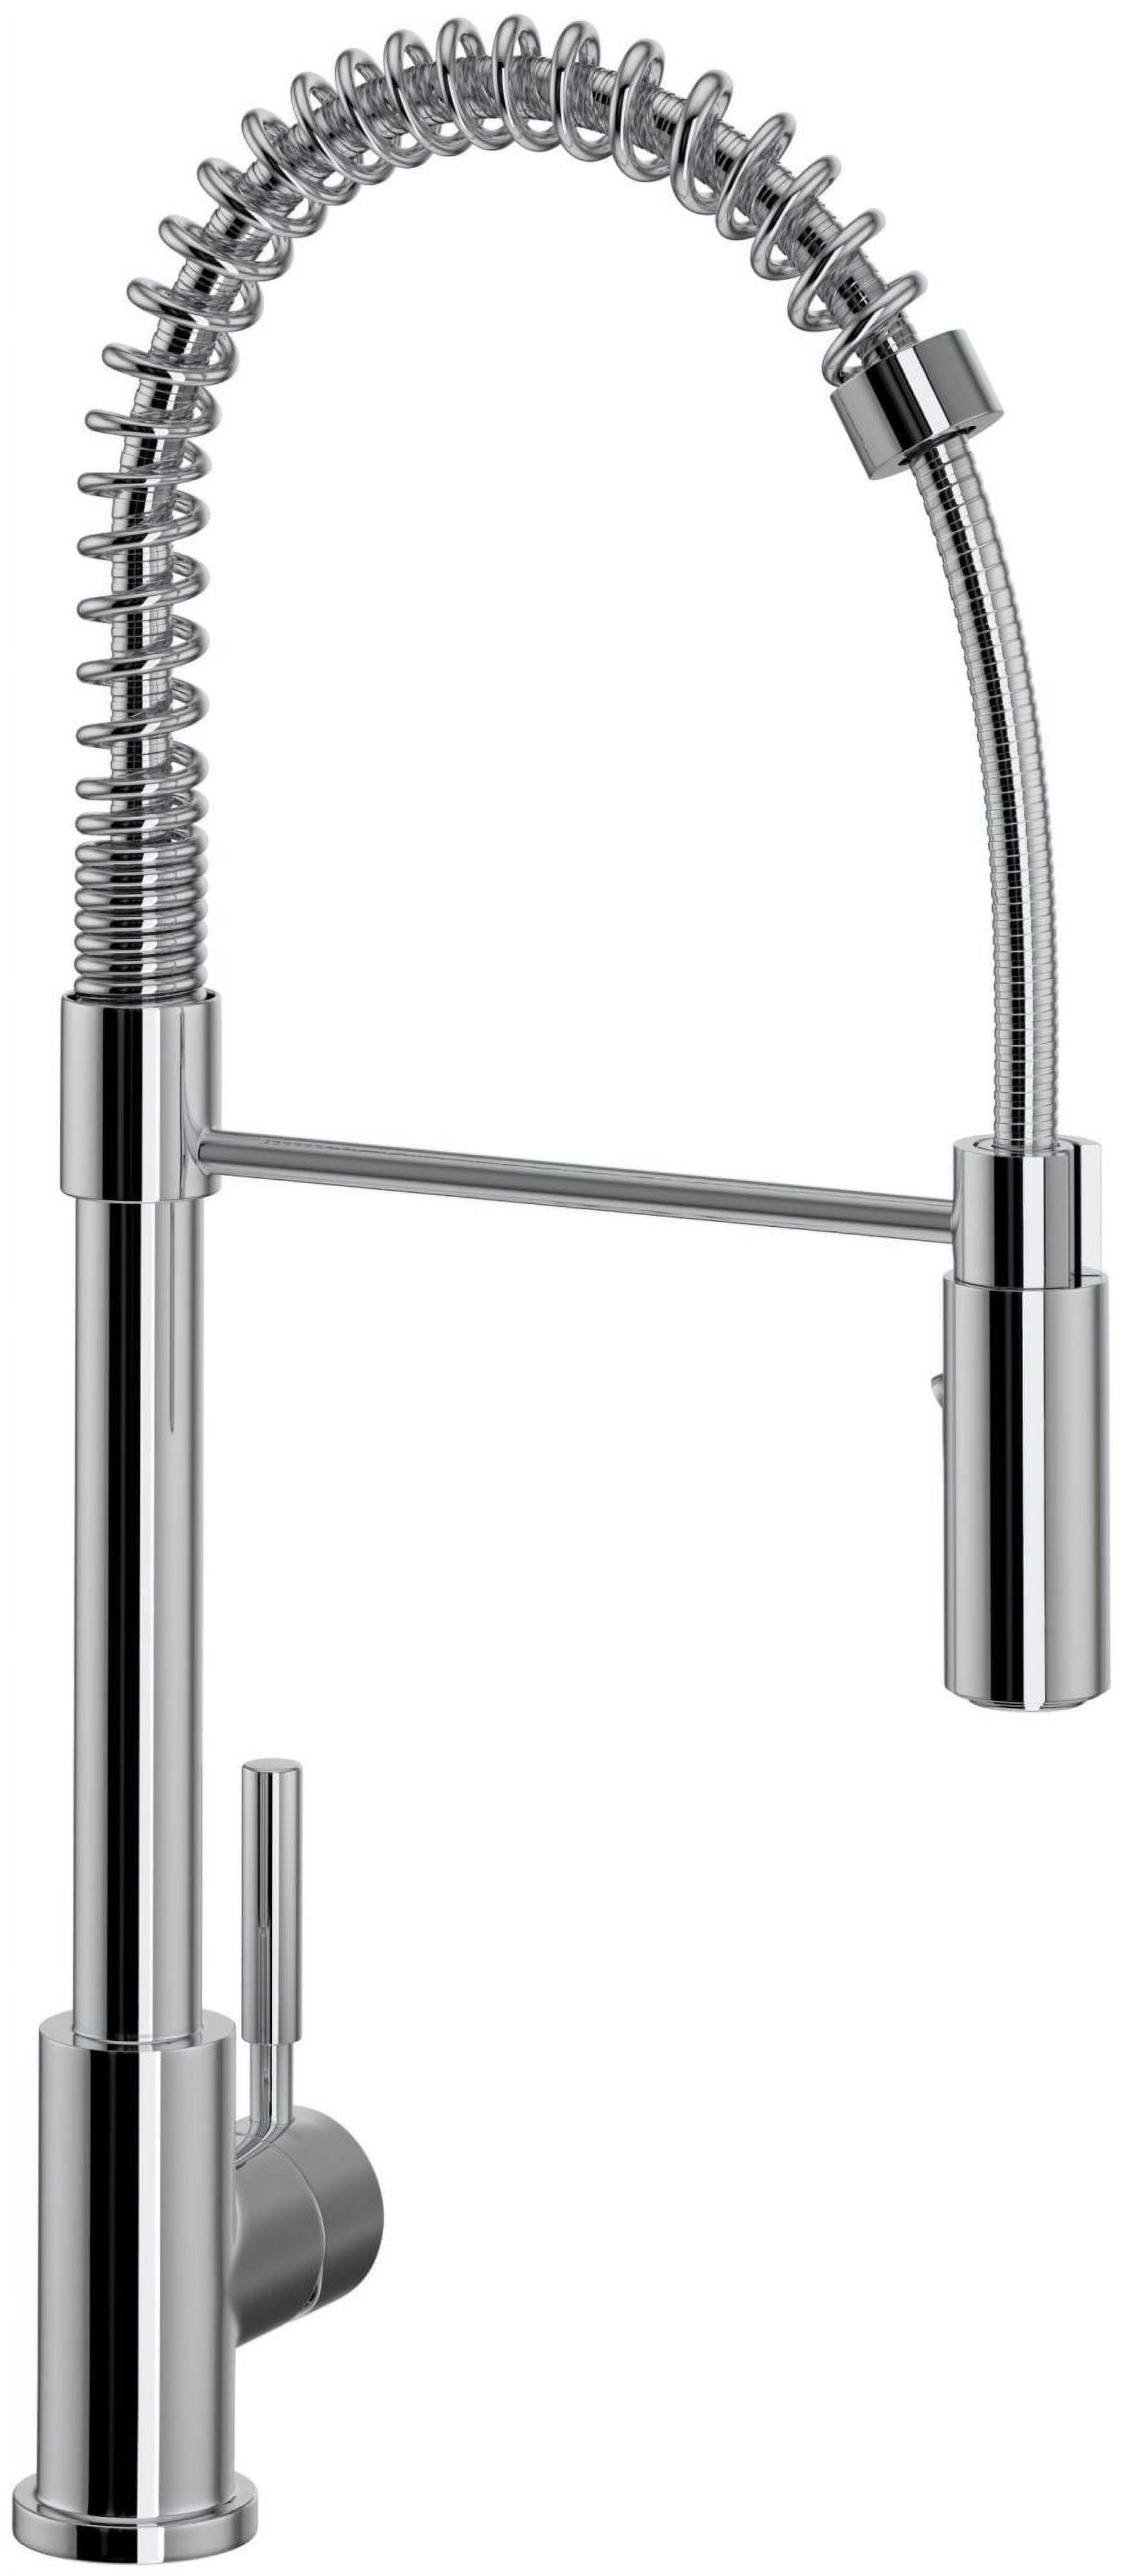 Sleek 21'' Polished Chrome Pull-Down Kitchen Faucet with Spray